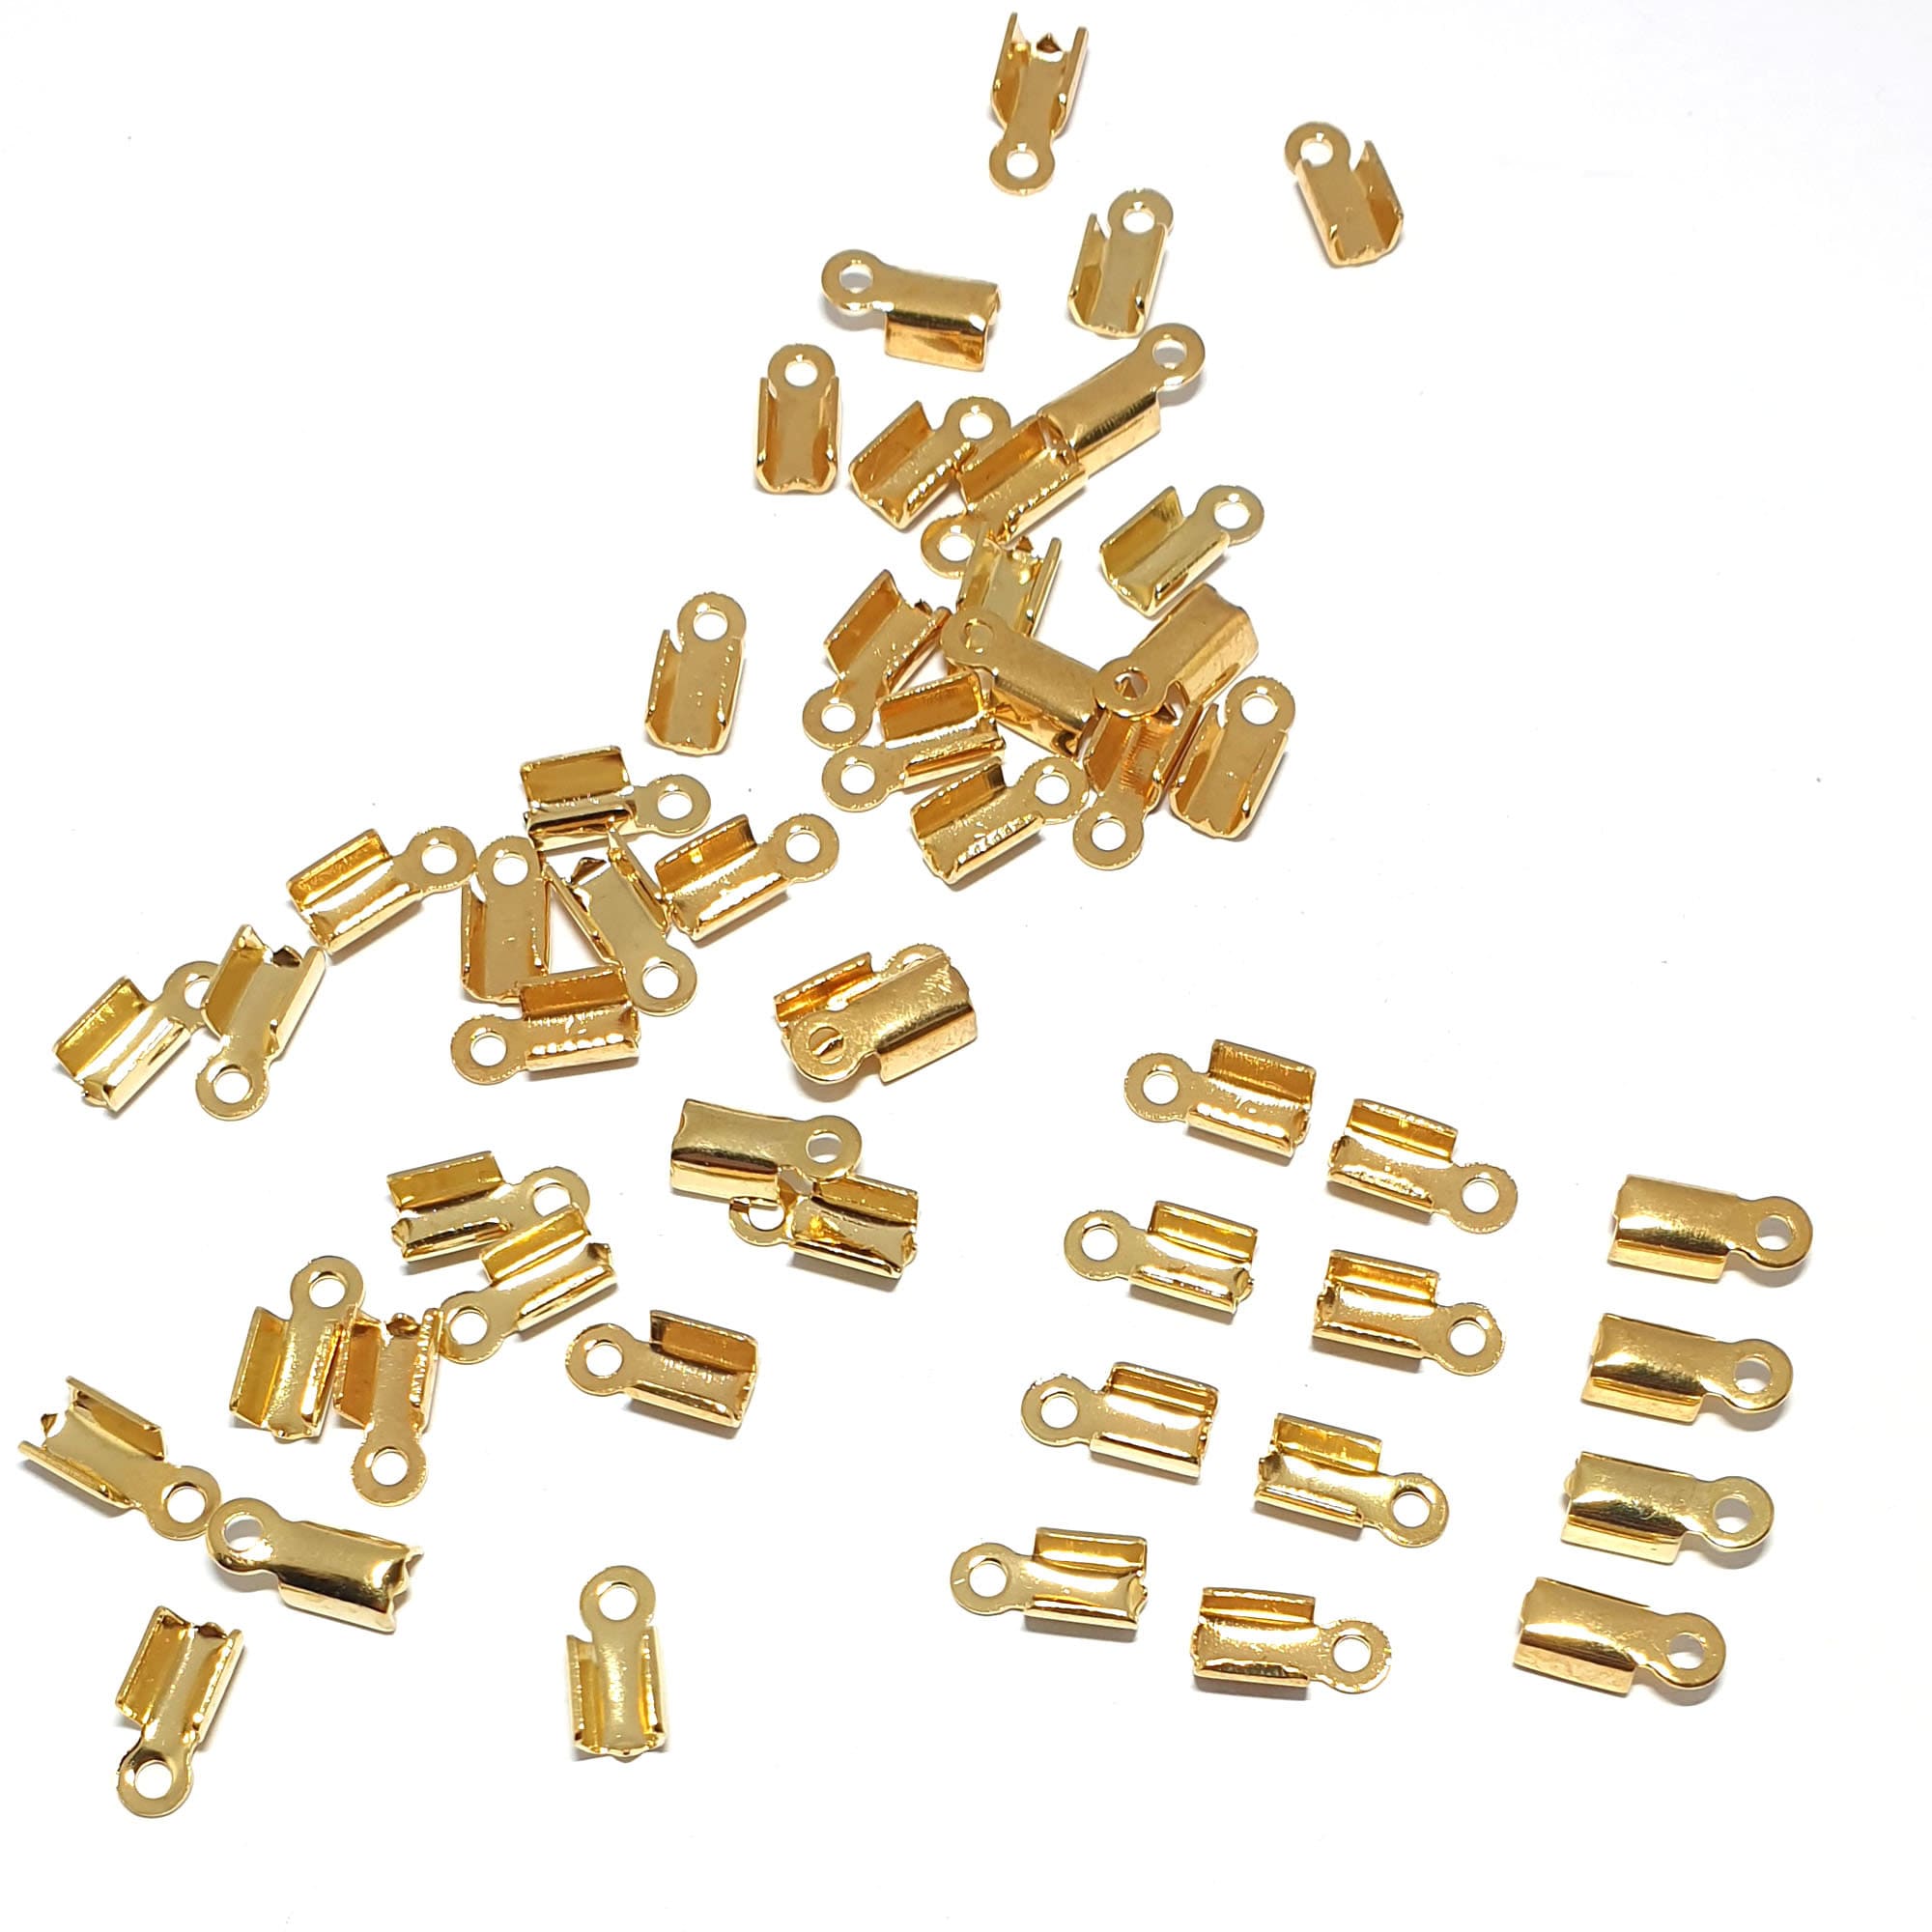 Craftdady 300pcs 18K Gold Crimp Bead Covers Brass Half Round Open Clamp  Knot Cover Terminator End Tips 4mm Diameter for Bracelet Necklace Jewelry